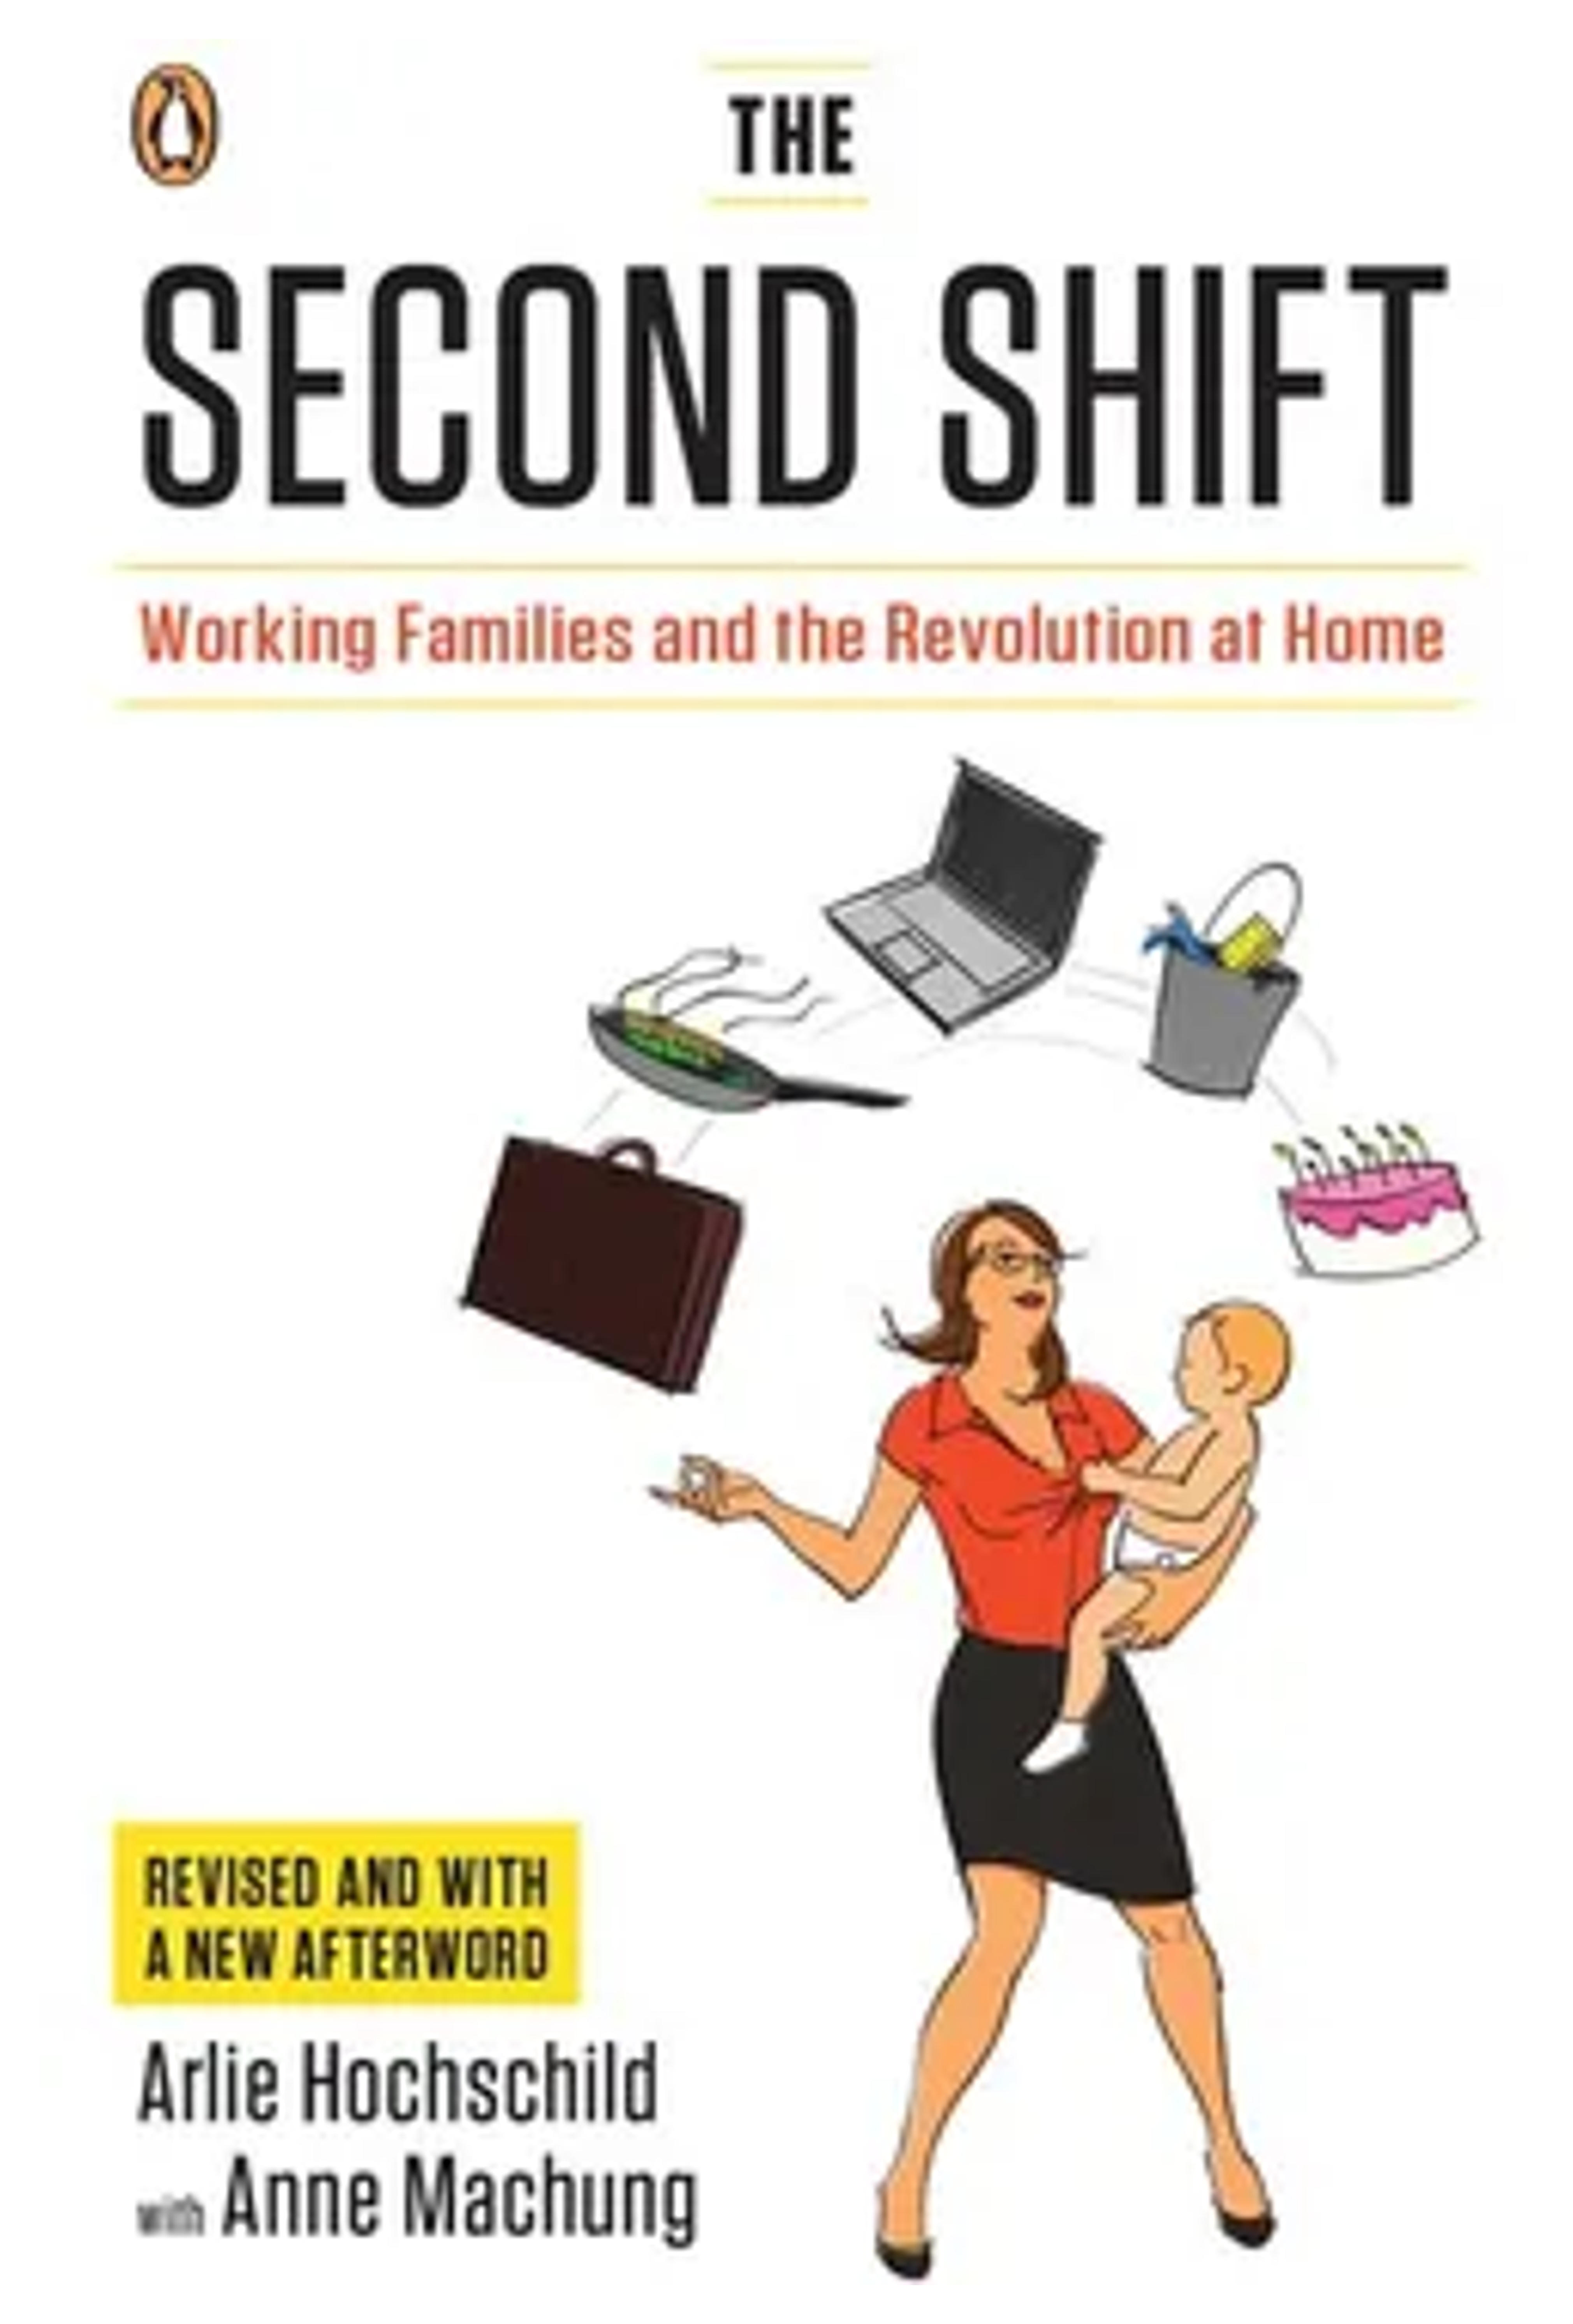 The Second Shift: Working Families and the Revolution at Home